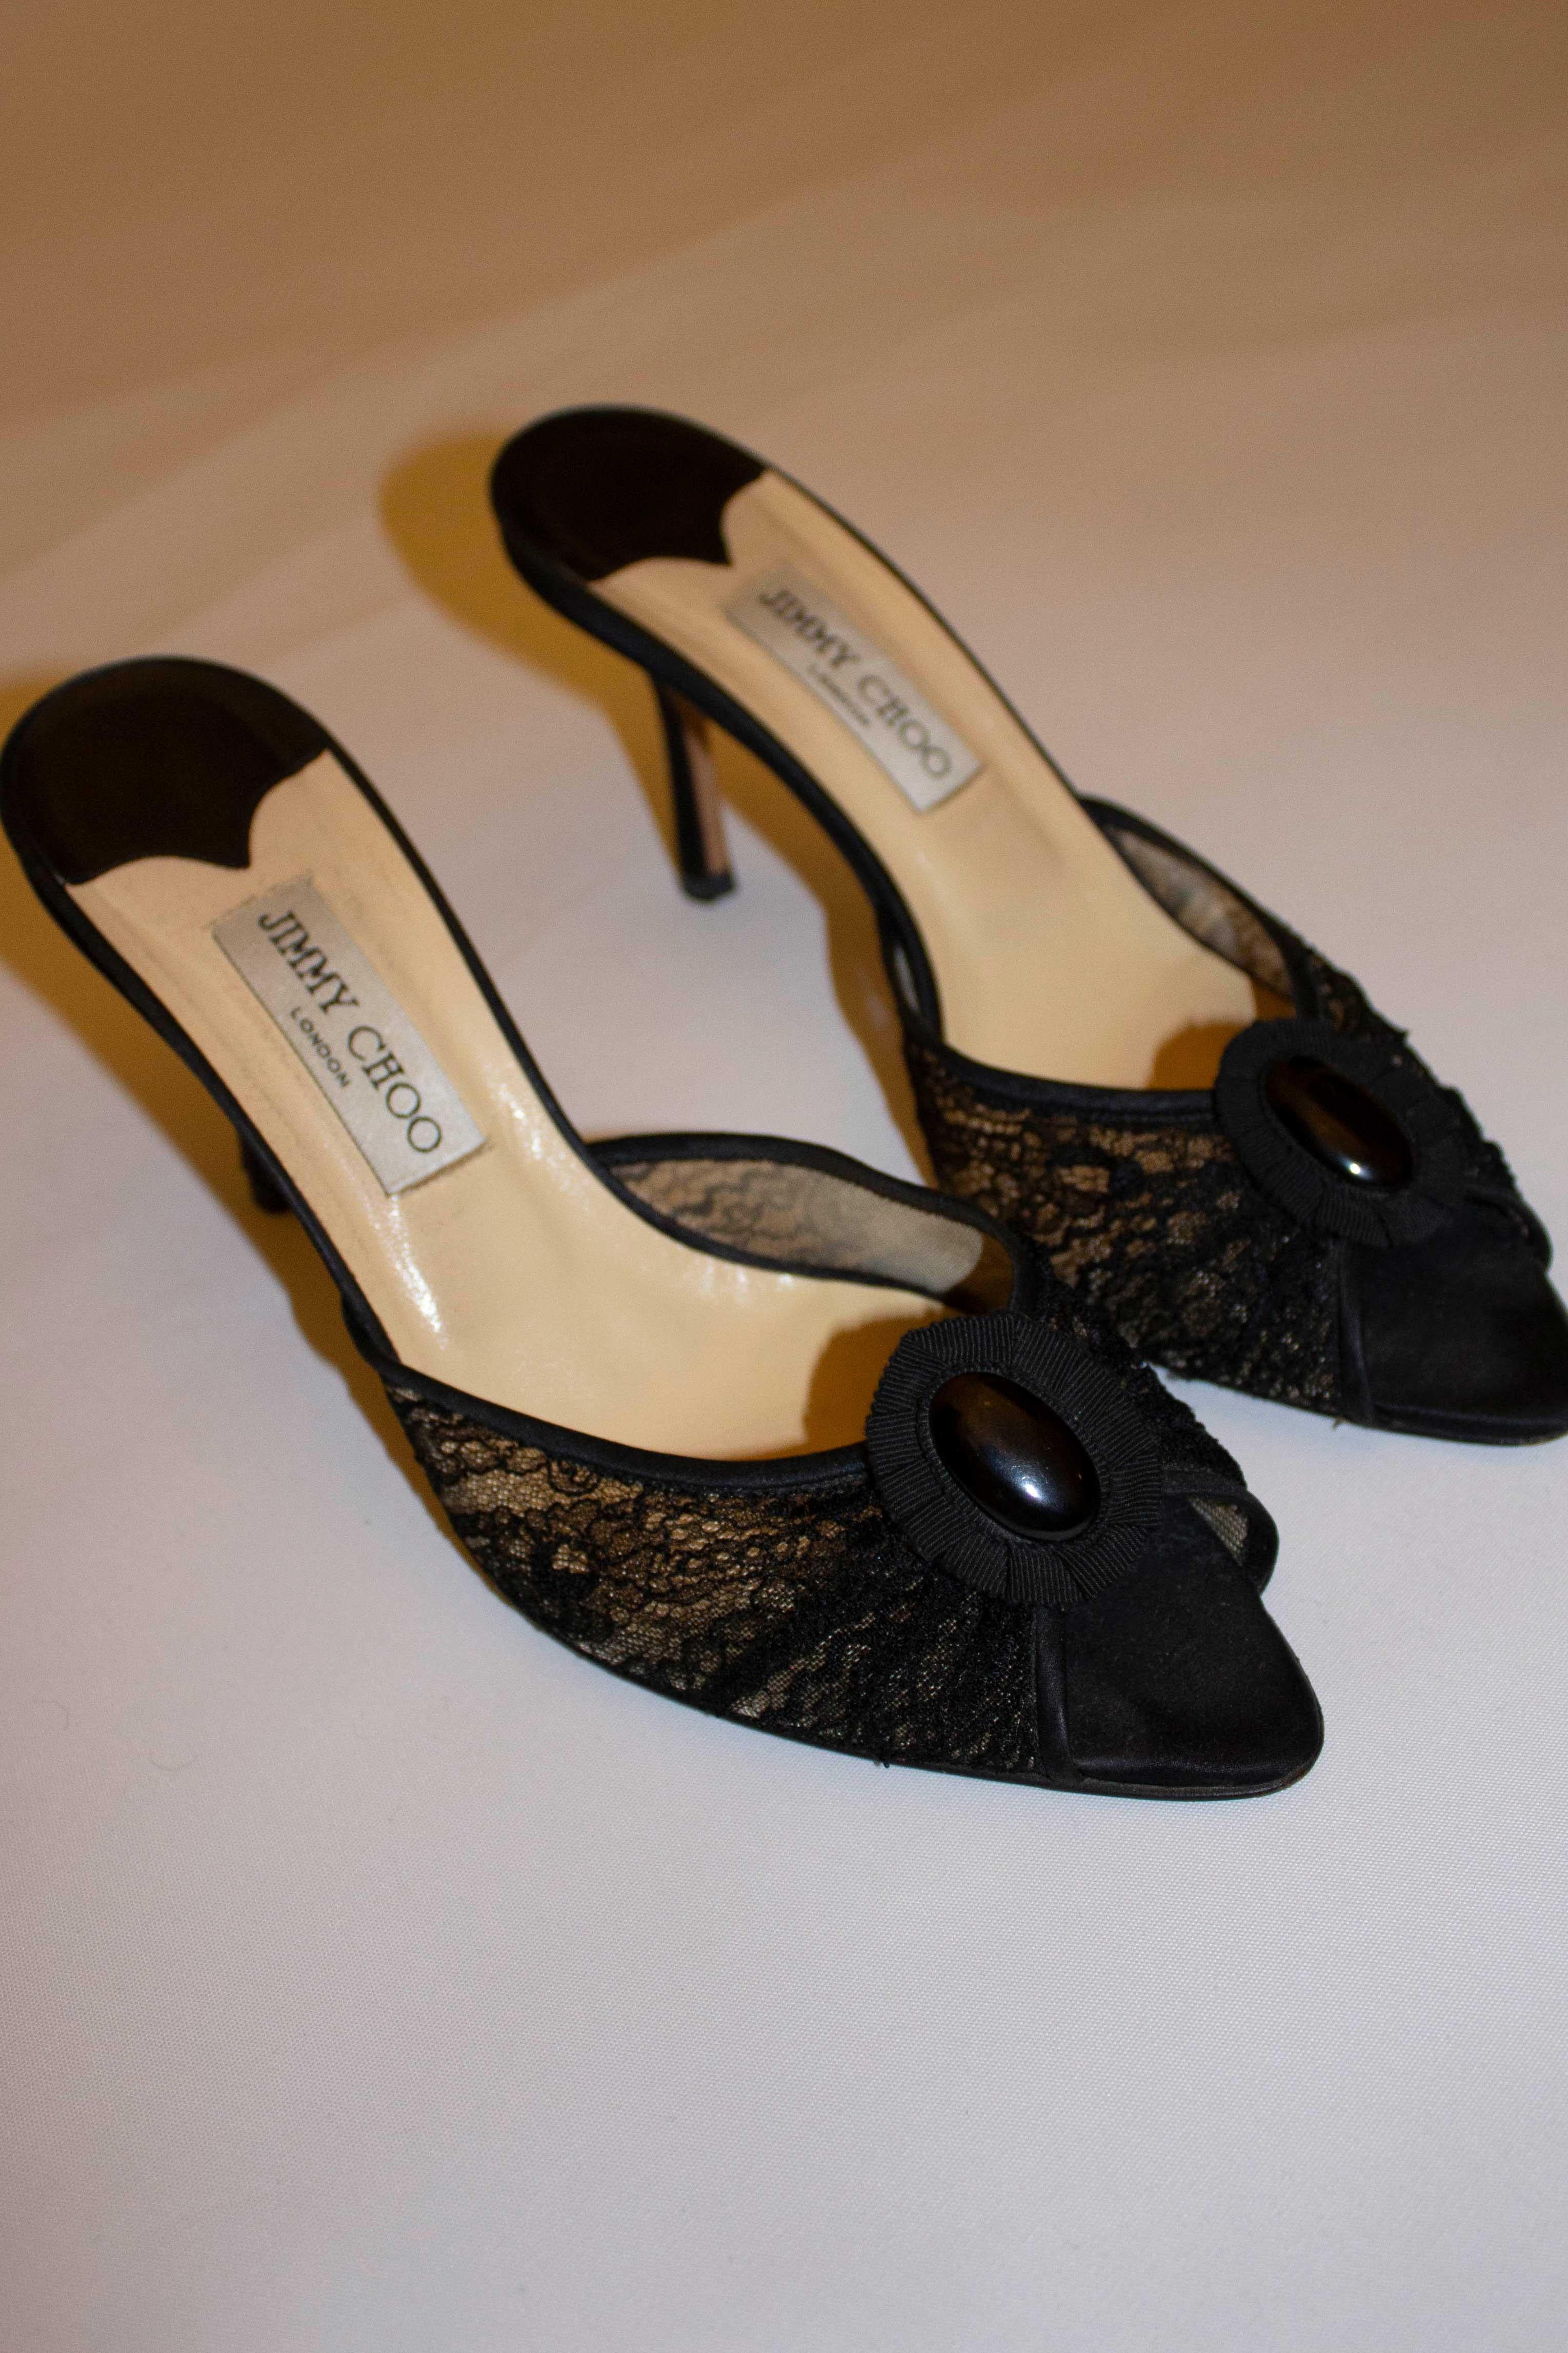 A head turning pair of heels by Jimmy Choo. In black lace with grosgrain detail on the front, the heels are in excellent condition. Heel height 4'' size 39 1/2.